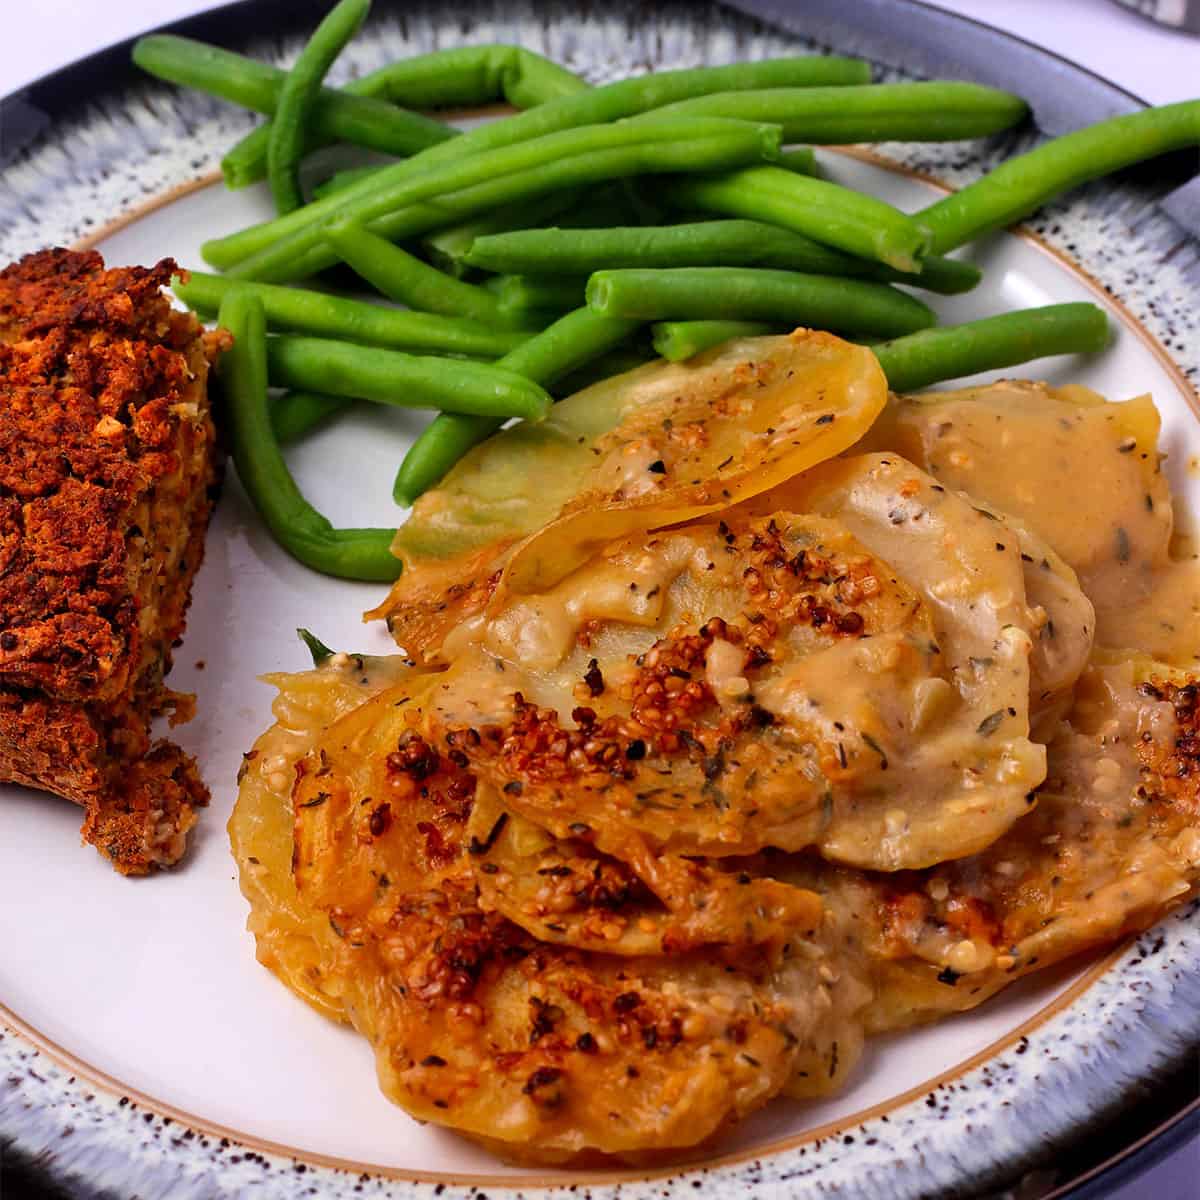 A plate with vegan scalloped potatoes, green beans, and nut loaf.